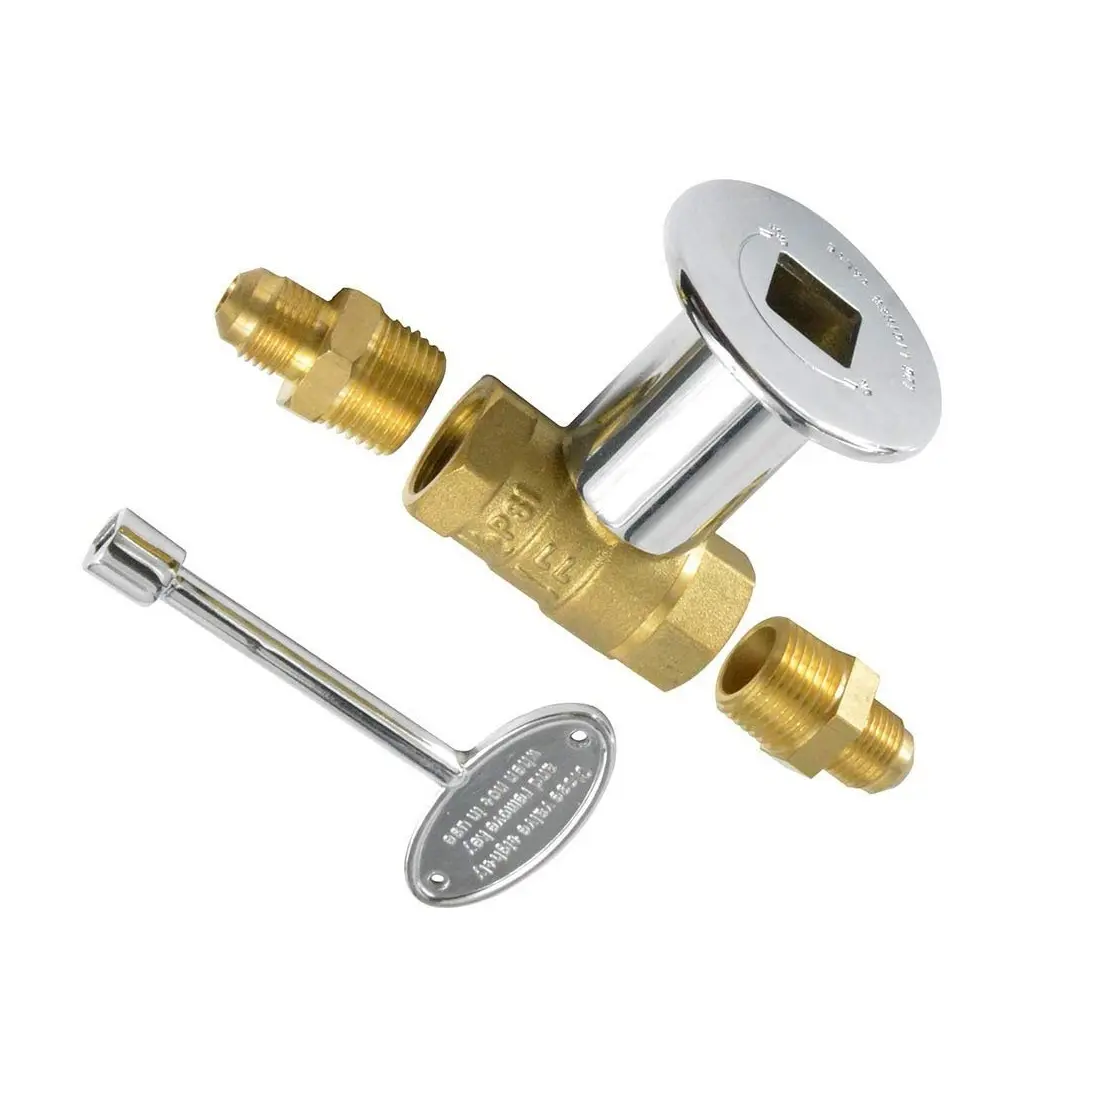 Gas brazier with lock 1 2 control valve High pressure valve key sleeve 1/2 regulating ball valve with copper connection